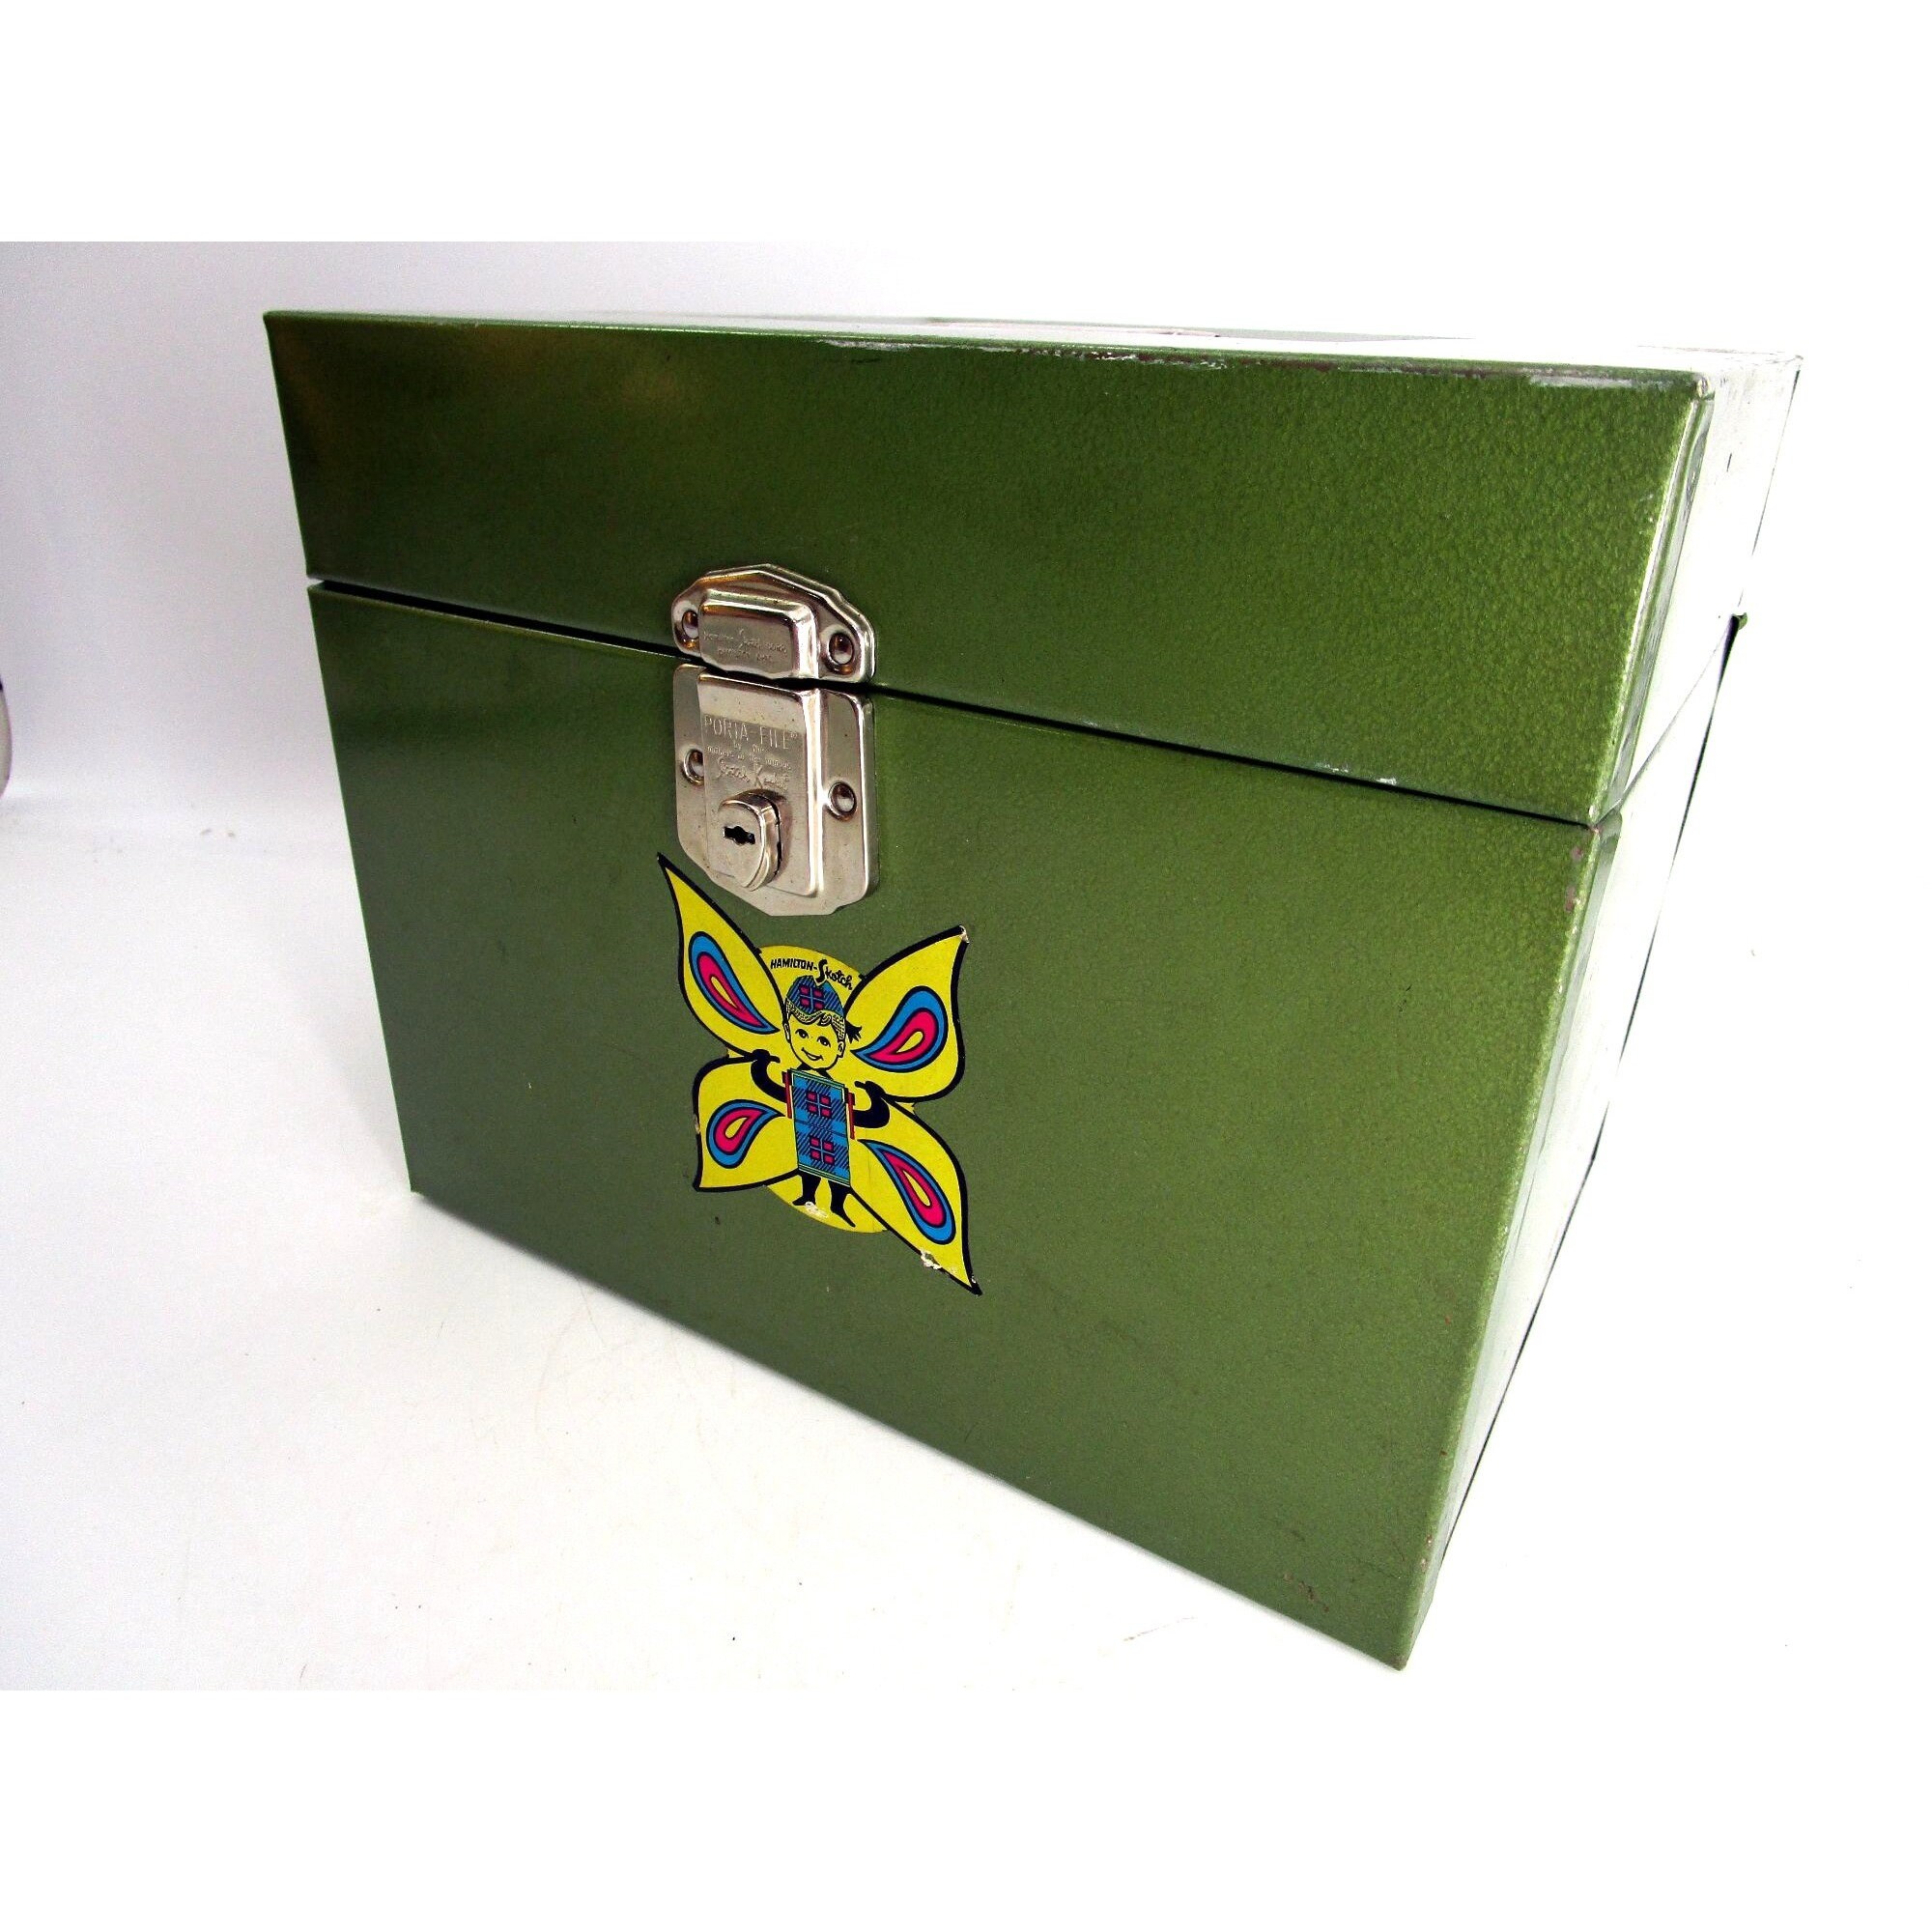 Hamilton Porta*file storage box with key 1950s - collectibles - by